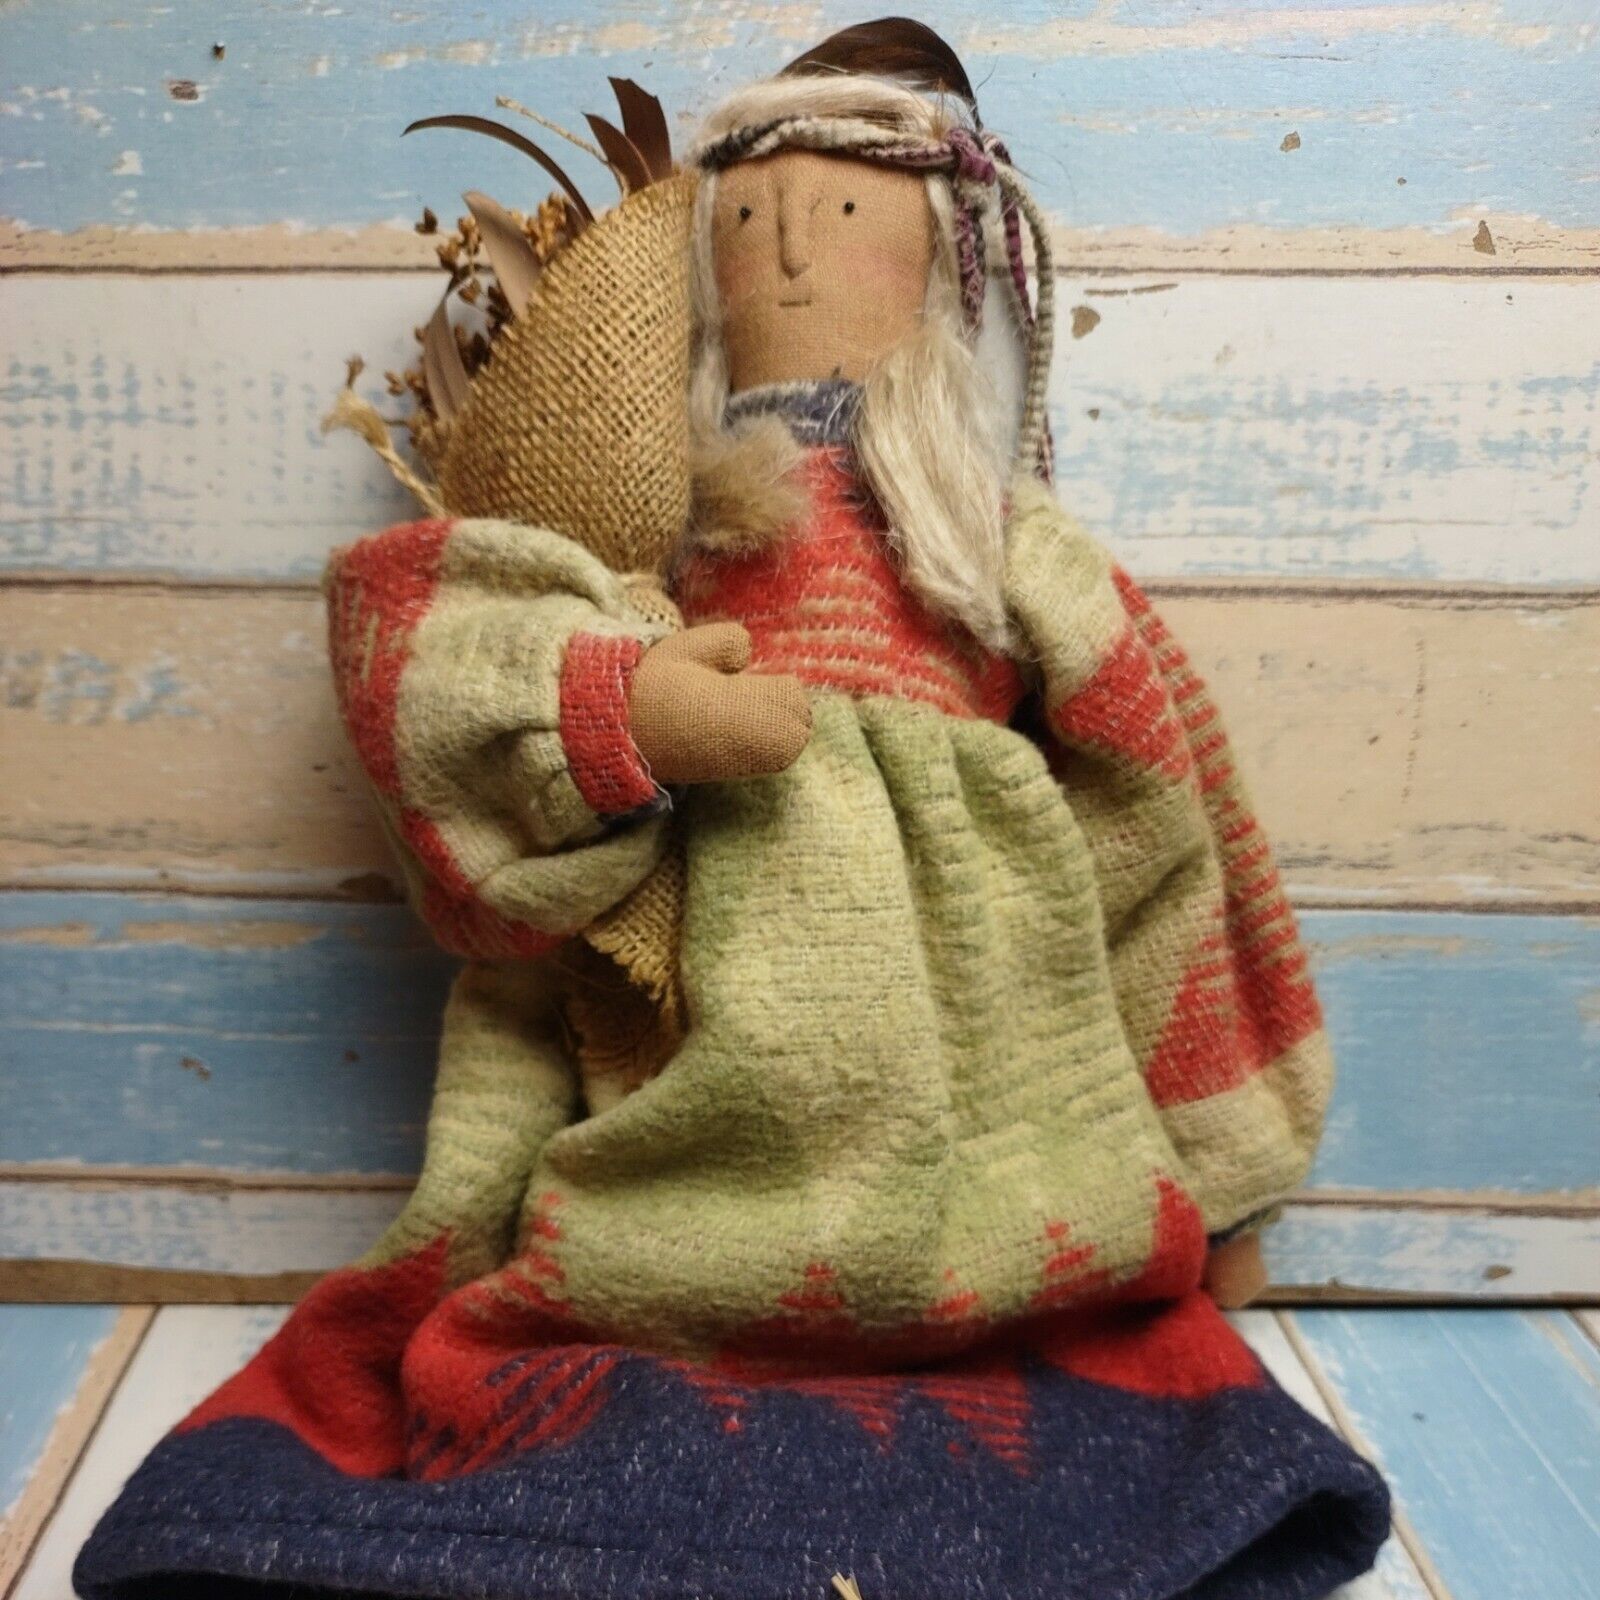 1994 Signed Sharon Andrews and Co. Doll Cloth Rag Nature hippie cottage Najtaniej, tanio